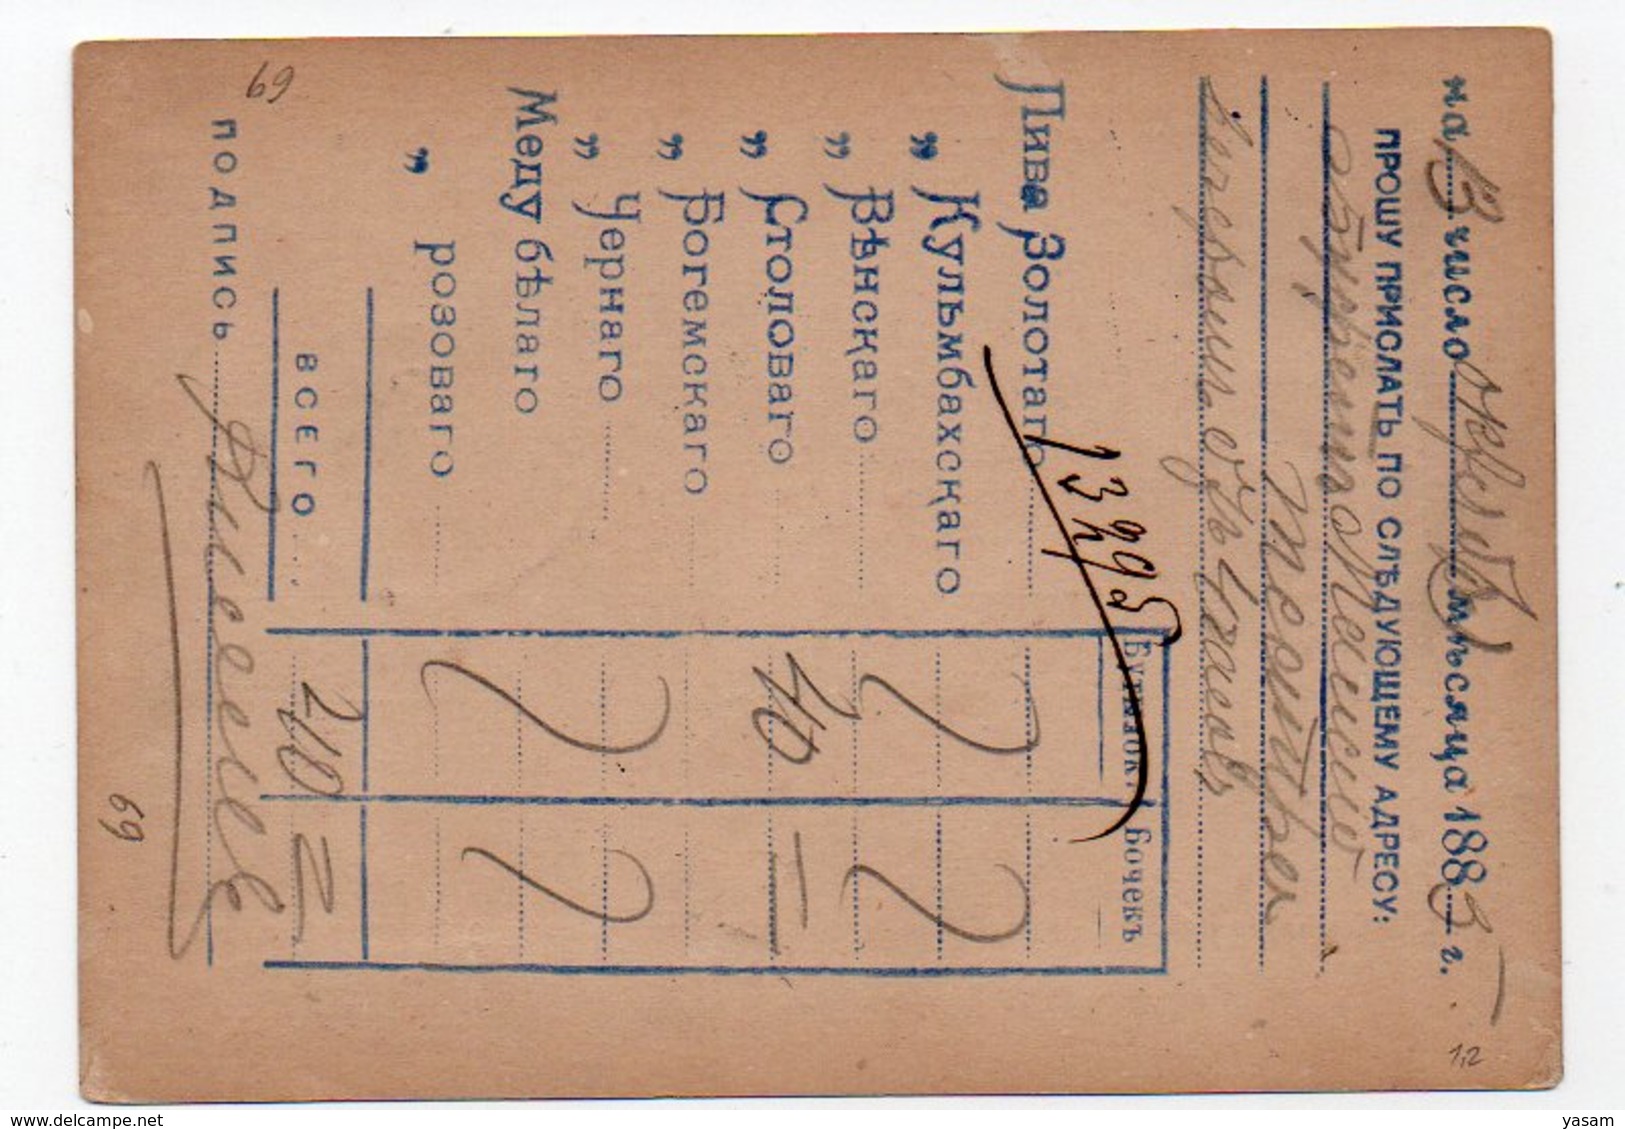 Russia. 1885. 3k Postal Stationary Card Sent To Moscow Beer Plant "Moskov Bavaria" With Order For Beer. - Birre